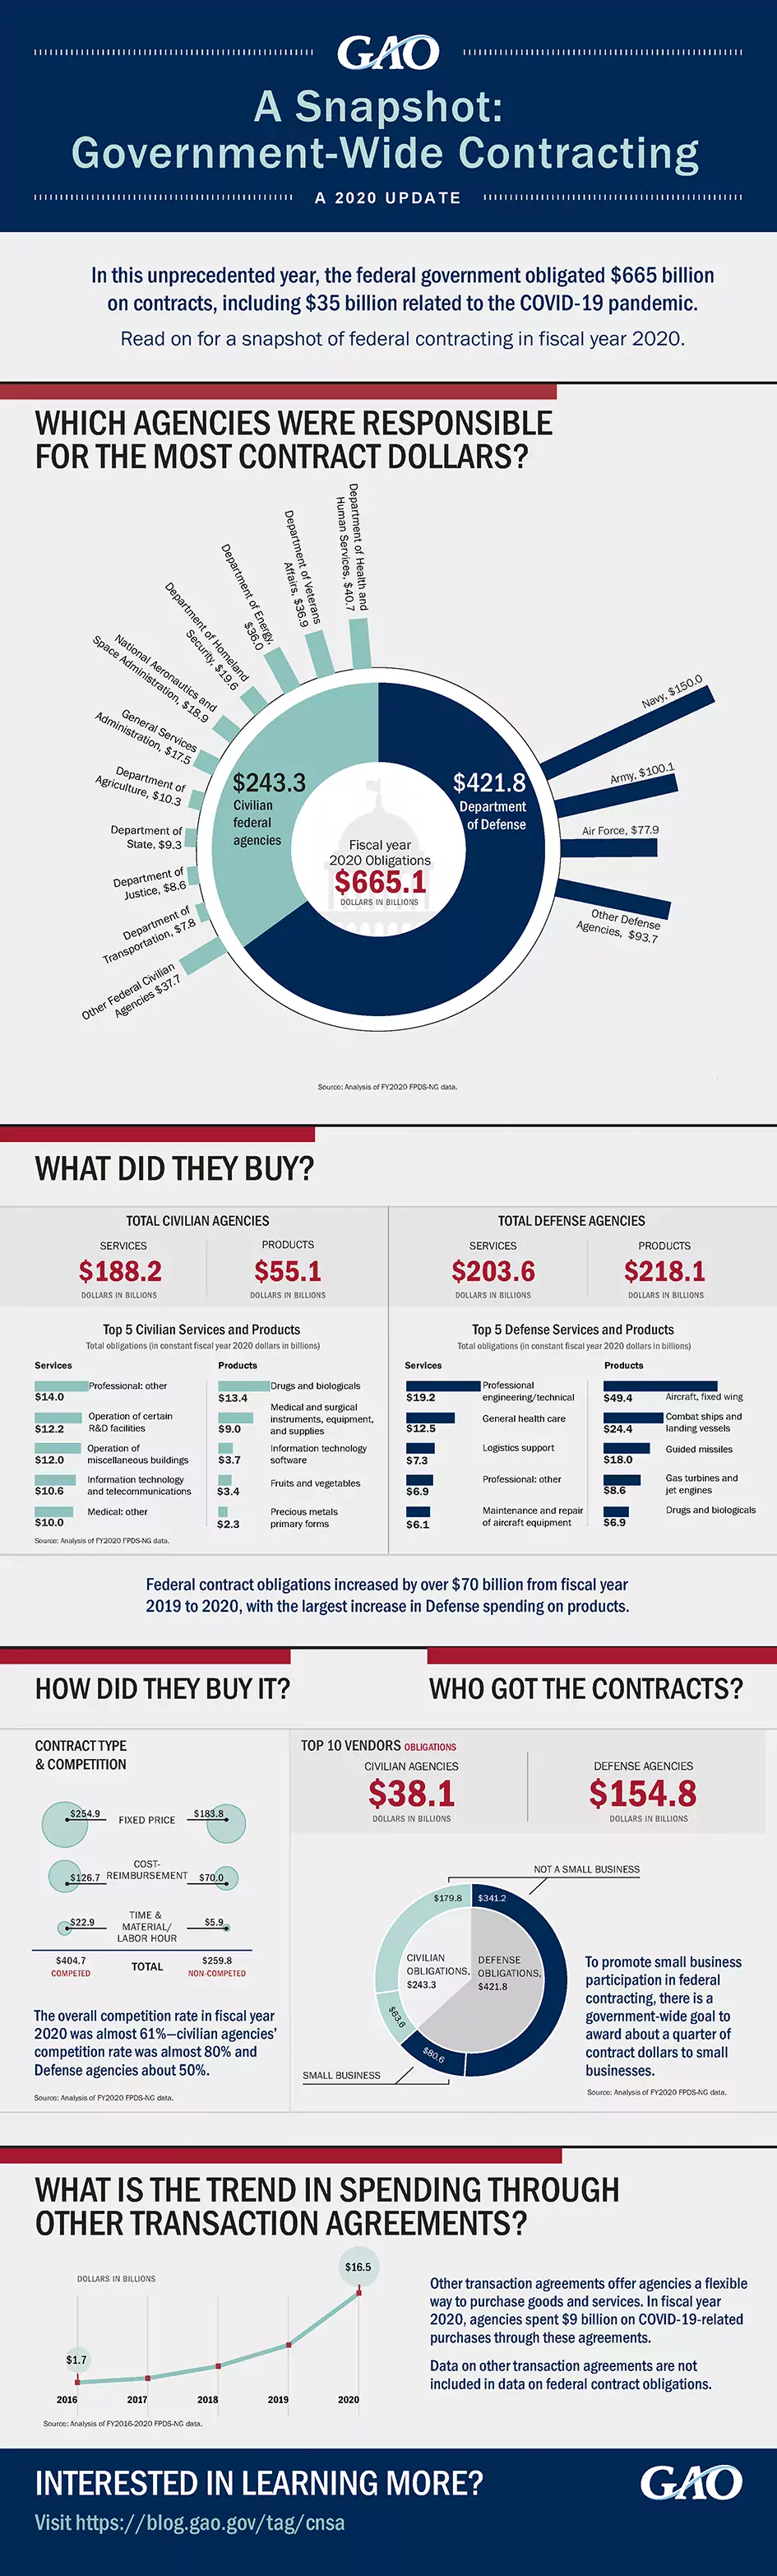 Information graphic showing government-wide contracting spending for FY 2020